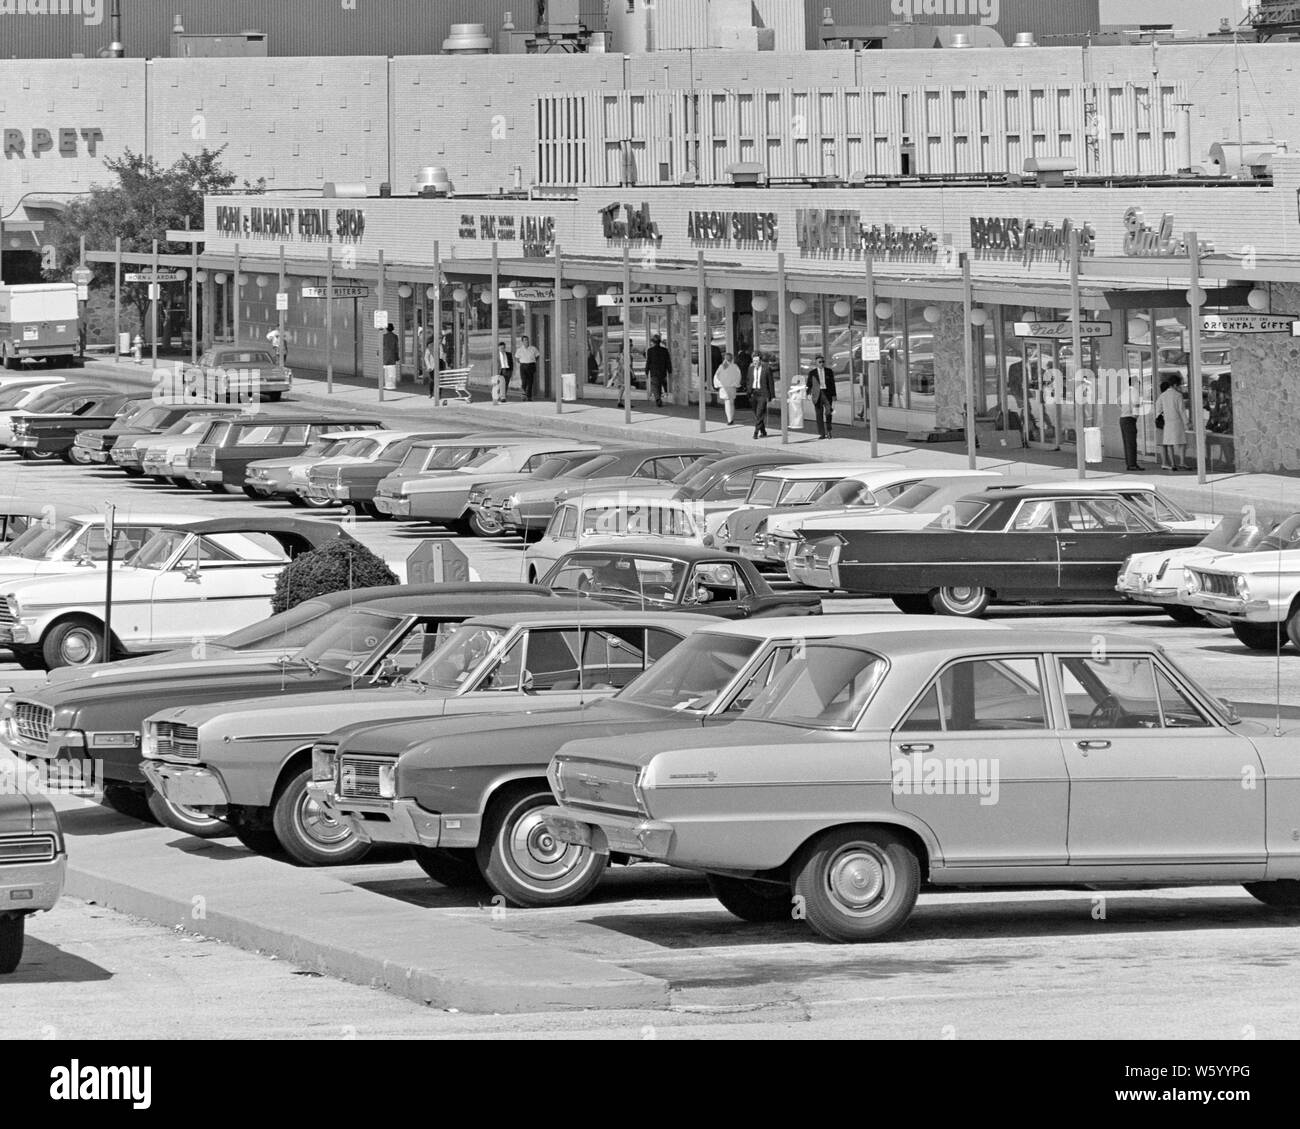 1970s VARIETY OF CARS JAM PACKED IN SHOPPING CENTER STRIP MALL PARKING LOT PEDESTRIANS AND SHOPPERS WALKING BY STORE FRONTS - s17107 HAR001 HARS VARIETY VEHICLES GROCERY STORE SHOPPING CENTER STORE FRONTS STRIP MALL GROWTH HAIR SALON PET STORE TOY STORE BLACK AND WHITE HAR001 OLD FASHIONED PARKING LOT Stock Photo